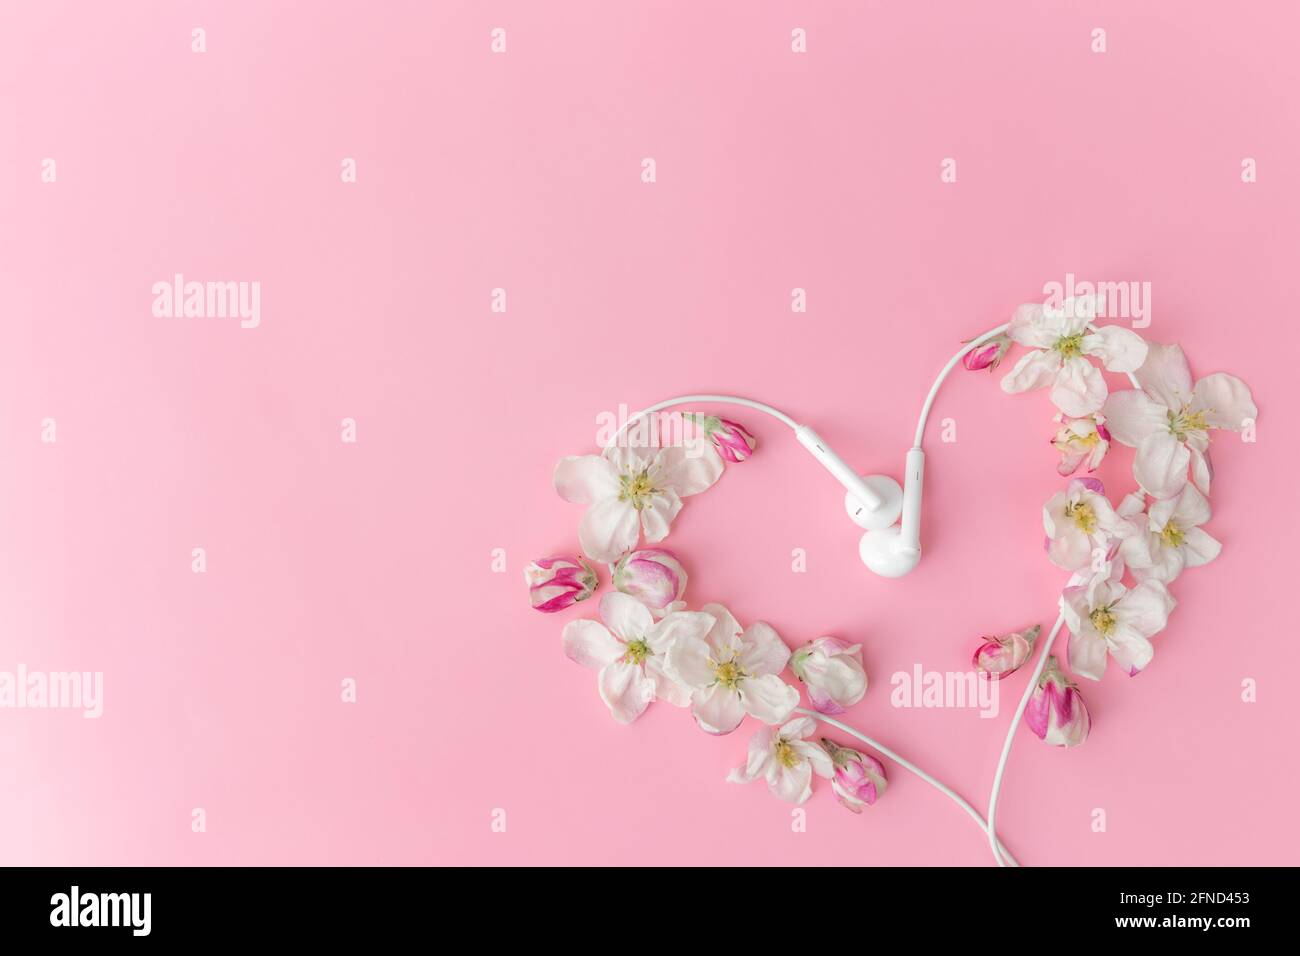 Flat lay on pink background with apple blossom heart shape and earphones Stock Photo